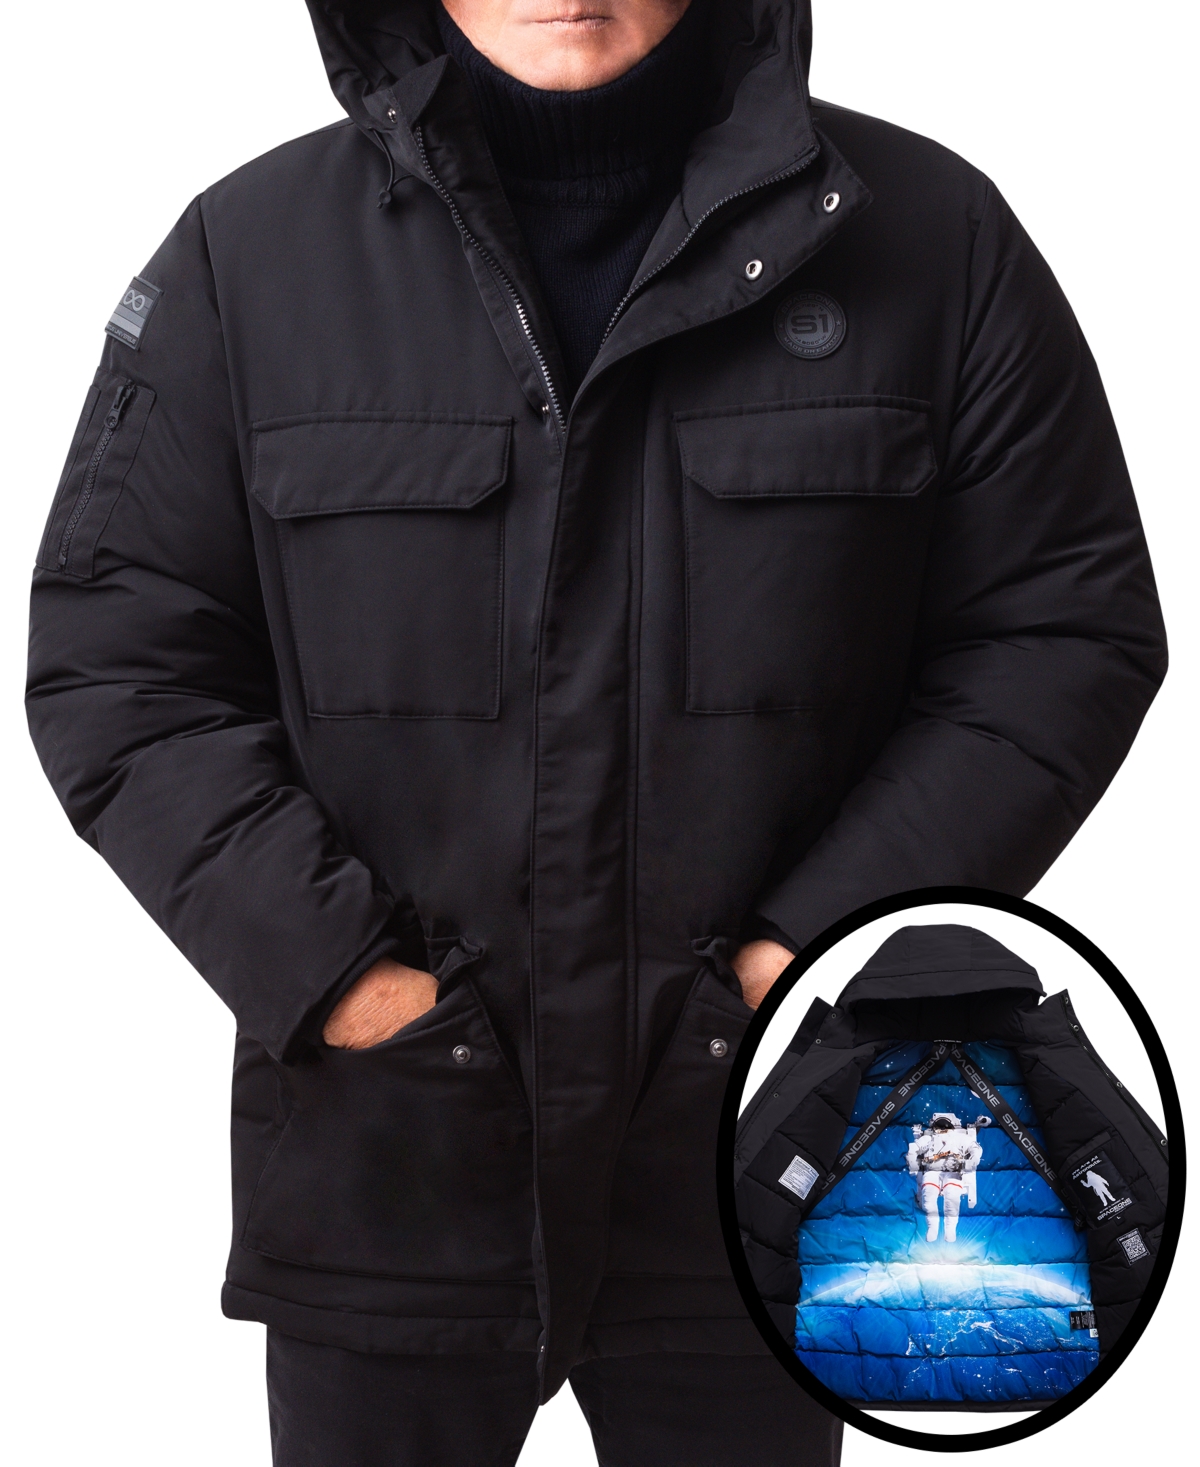 Space One Men's Nasa Inspired Parka Jacket With Printed Astronaut Interior In Black